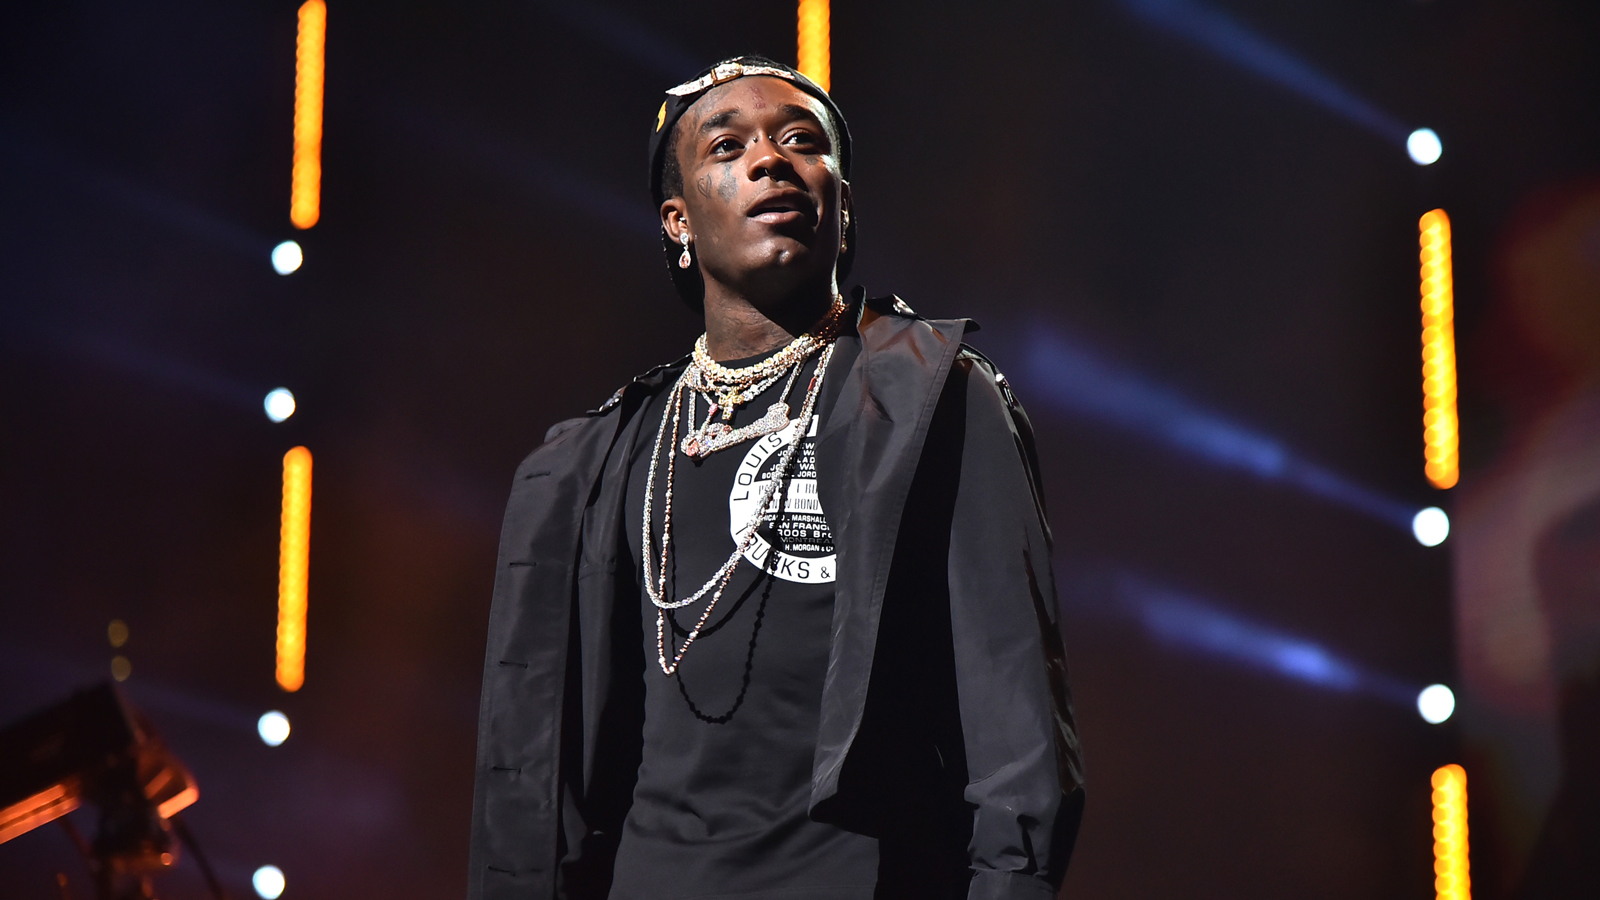 Lil Uzi Vert Shared A Snippet Of His Song With Travis Scott